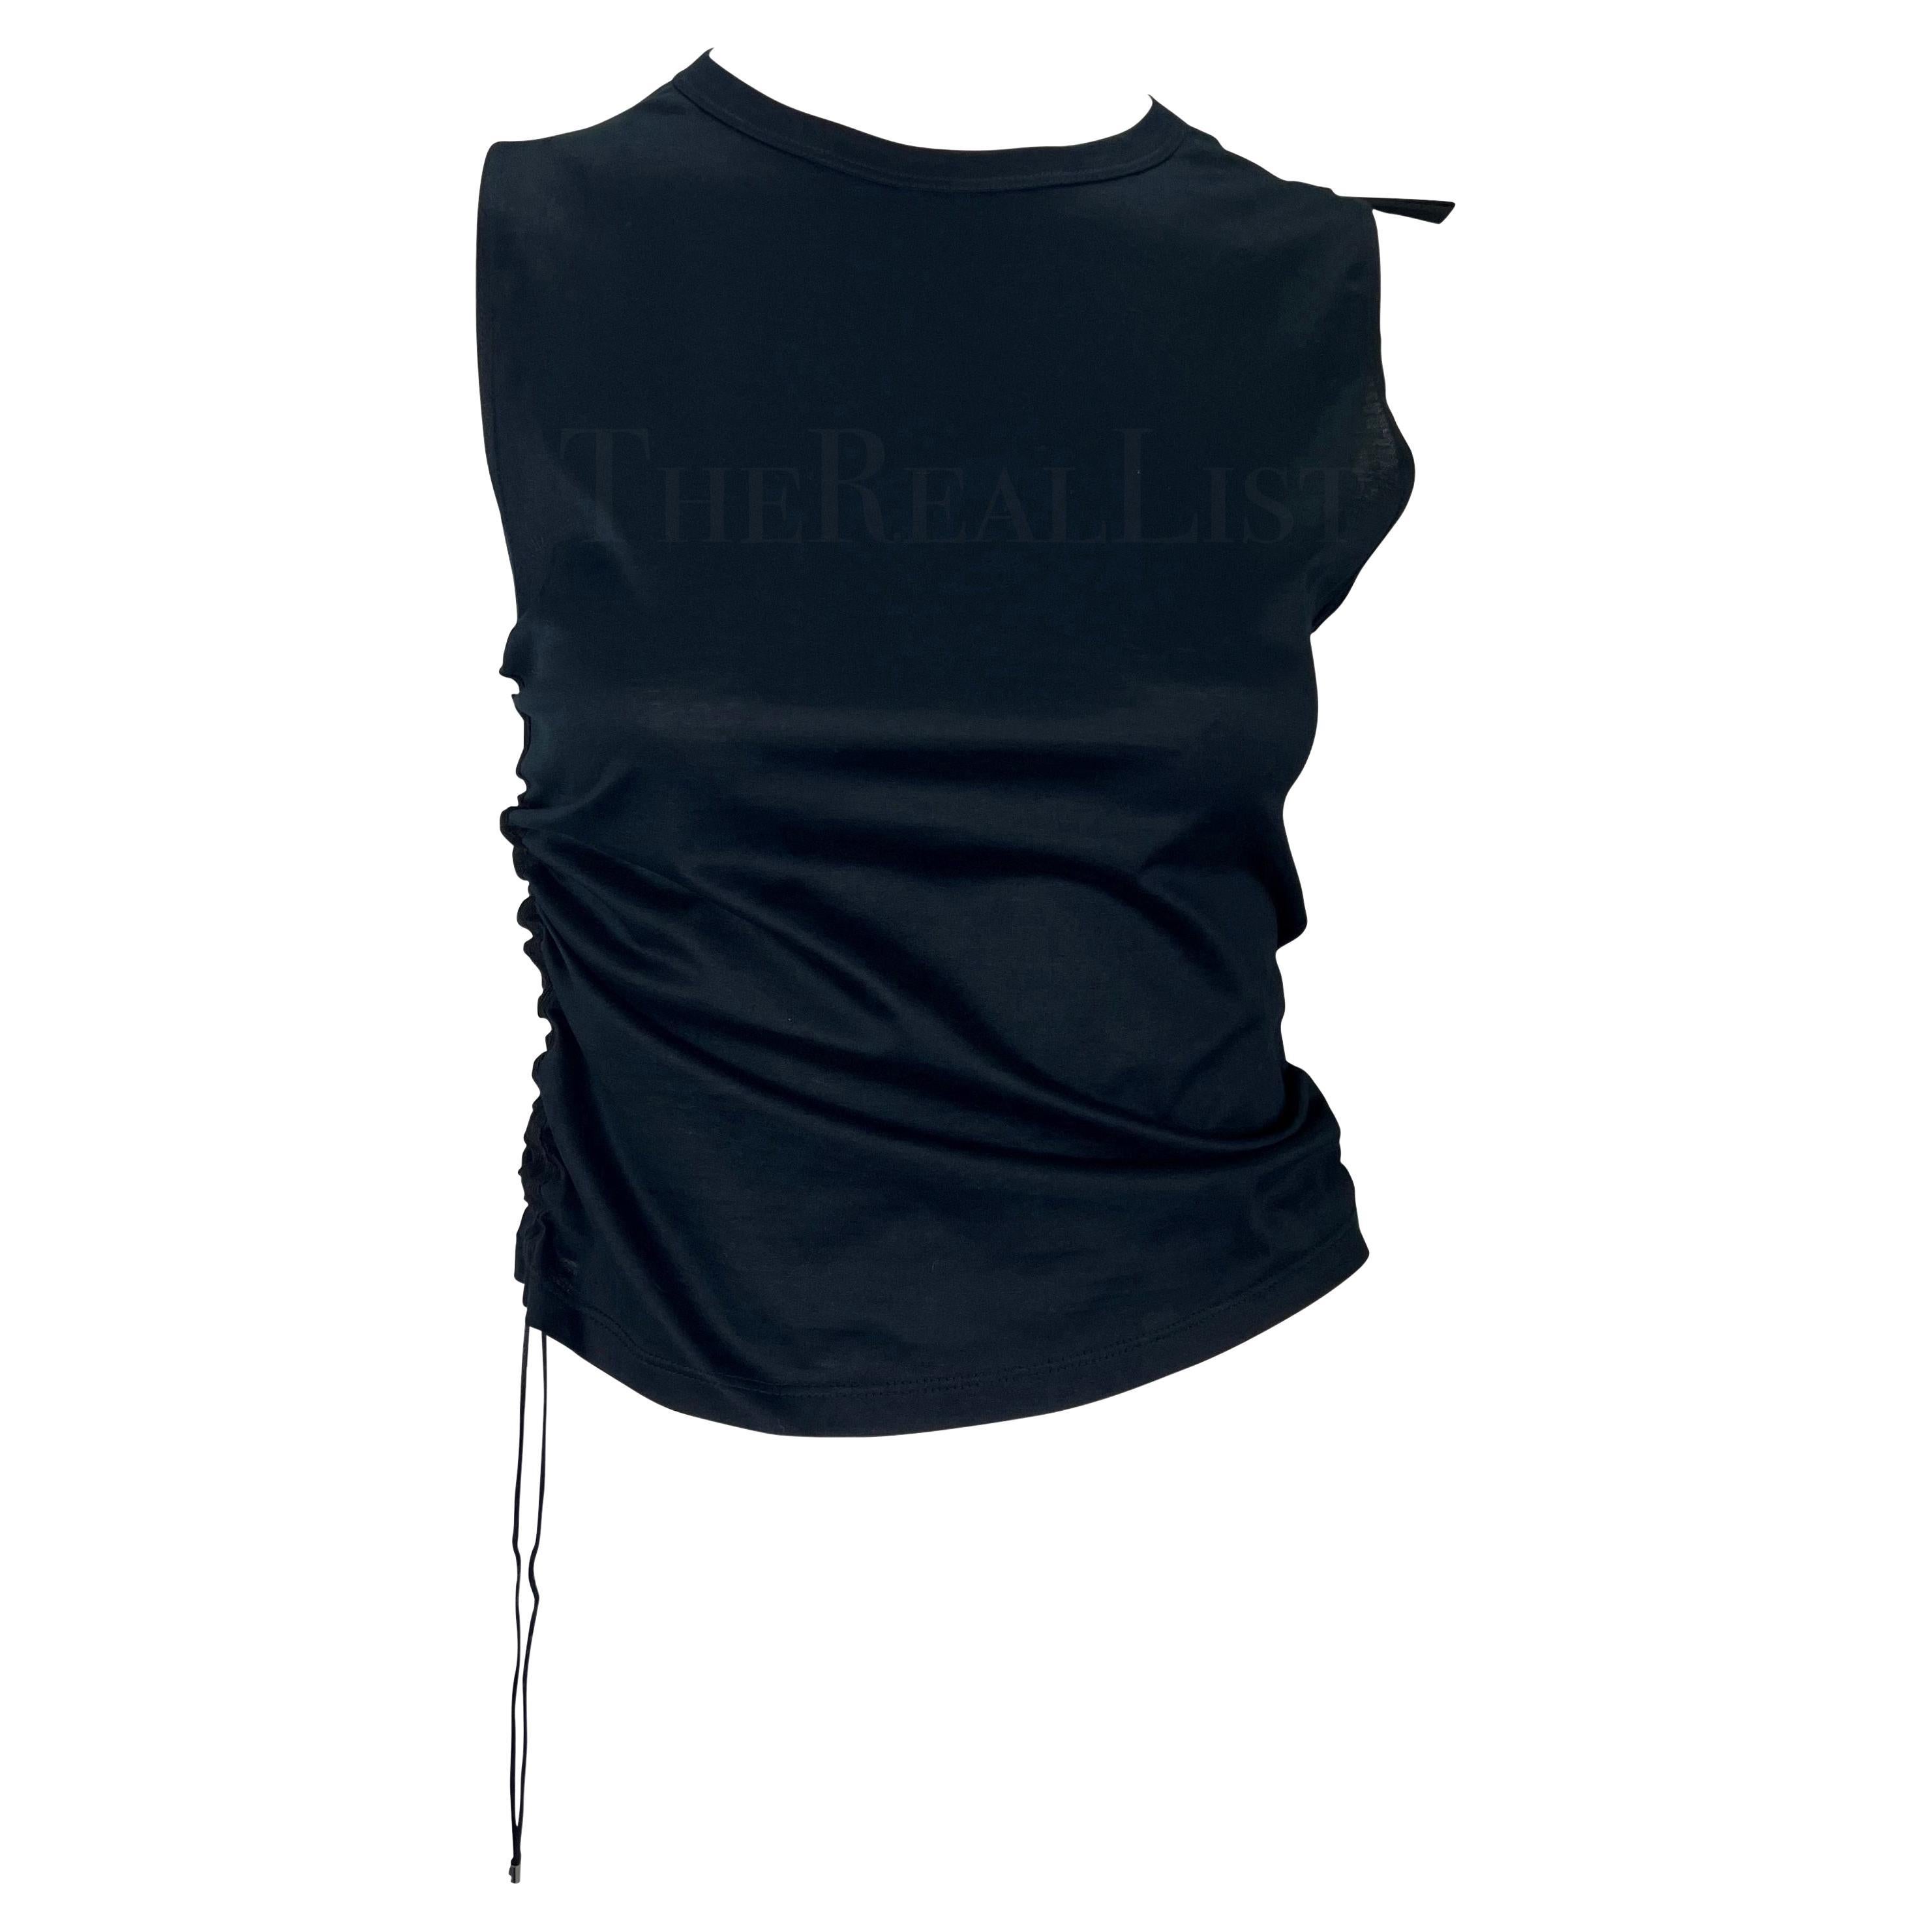 S/S 2001 Gucci by Tom Ford Black Sleeveless Drawstring Top For Sale